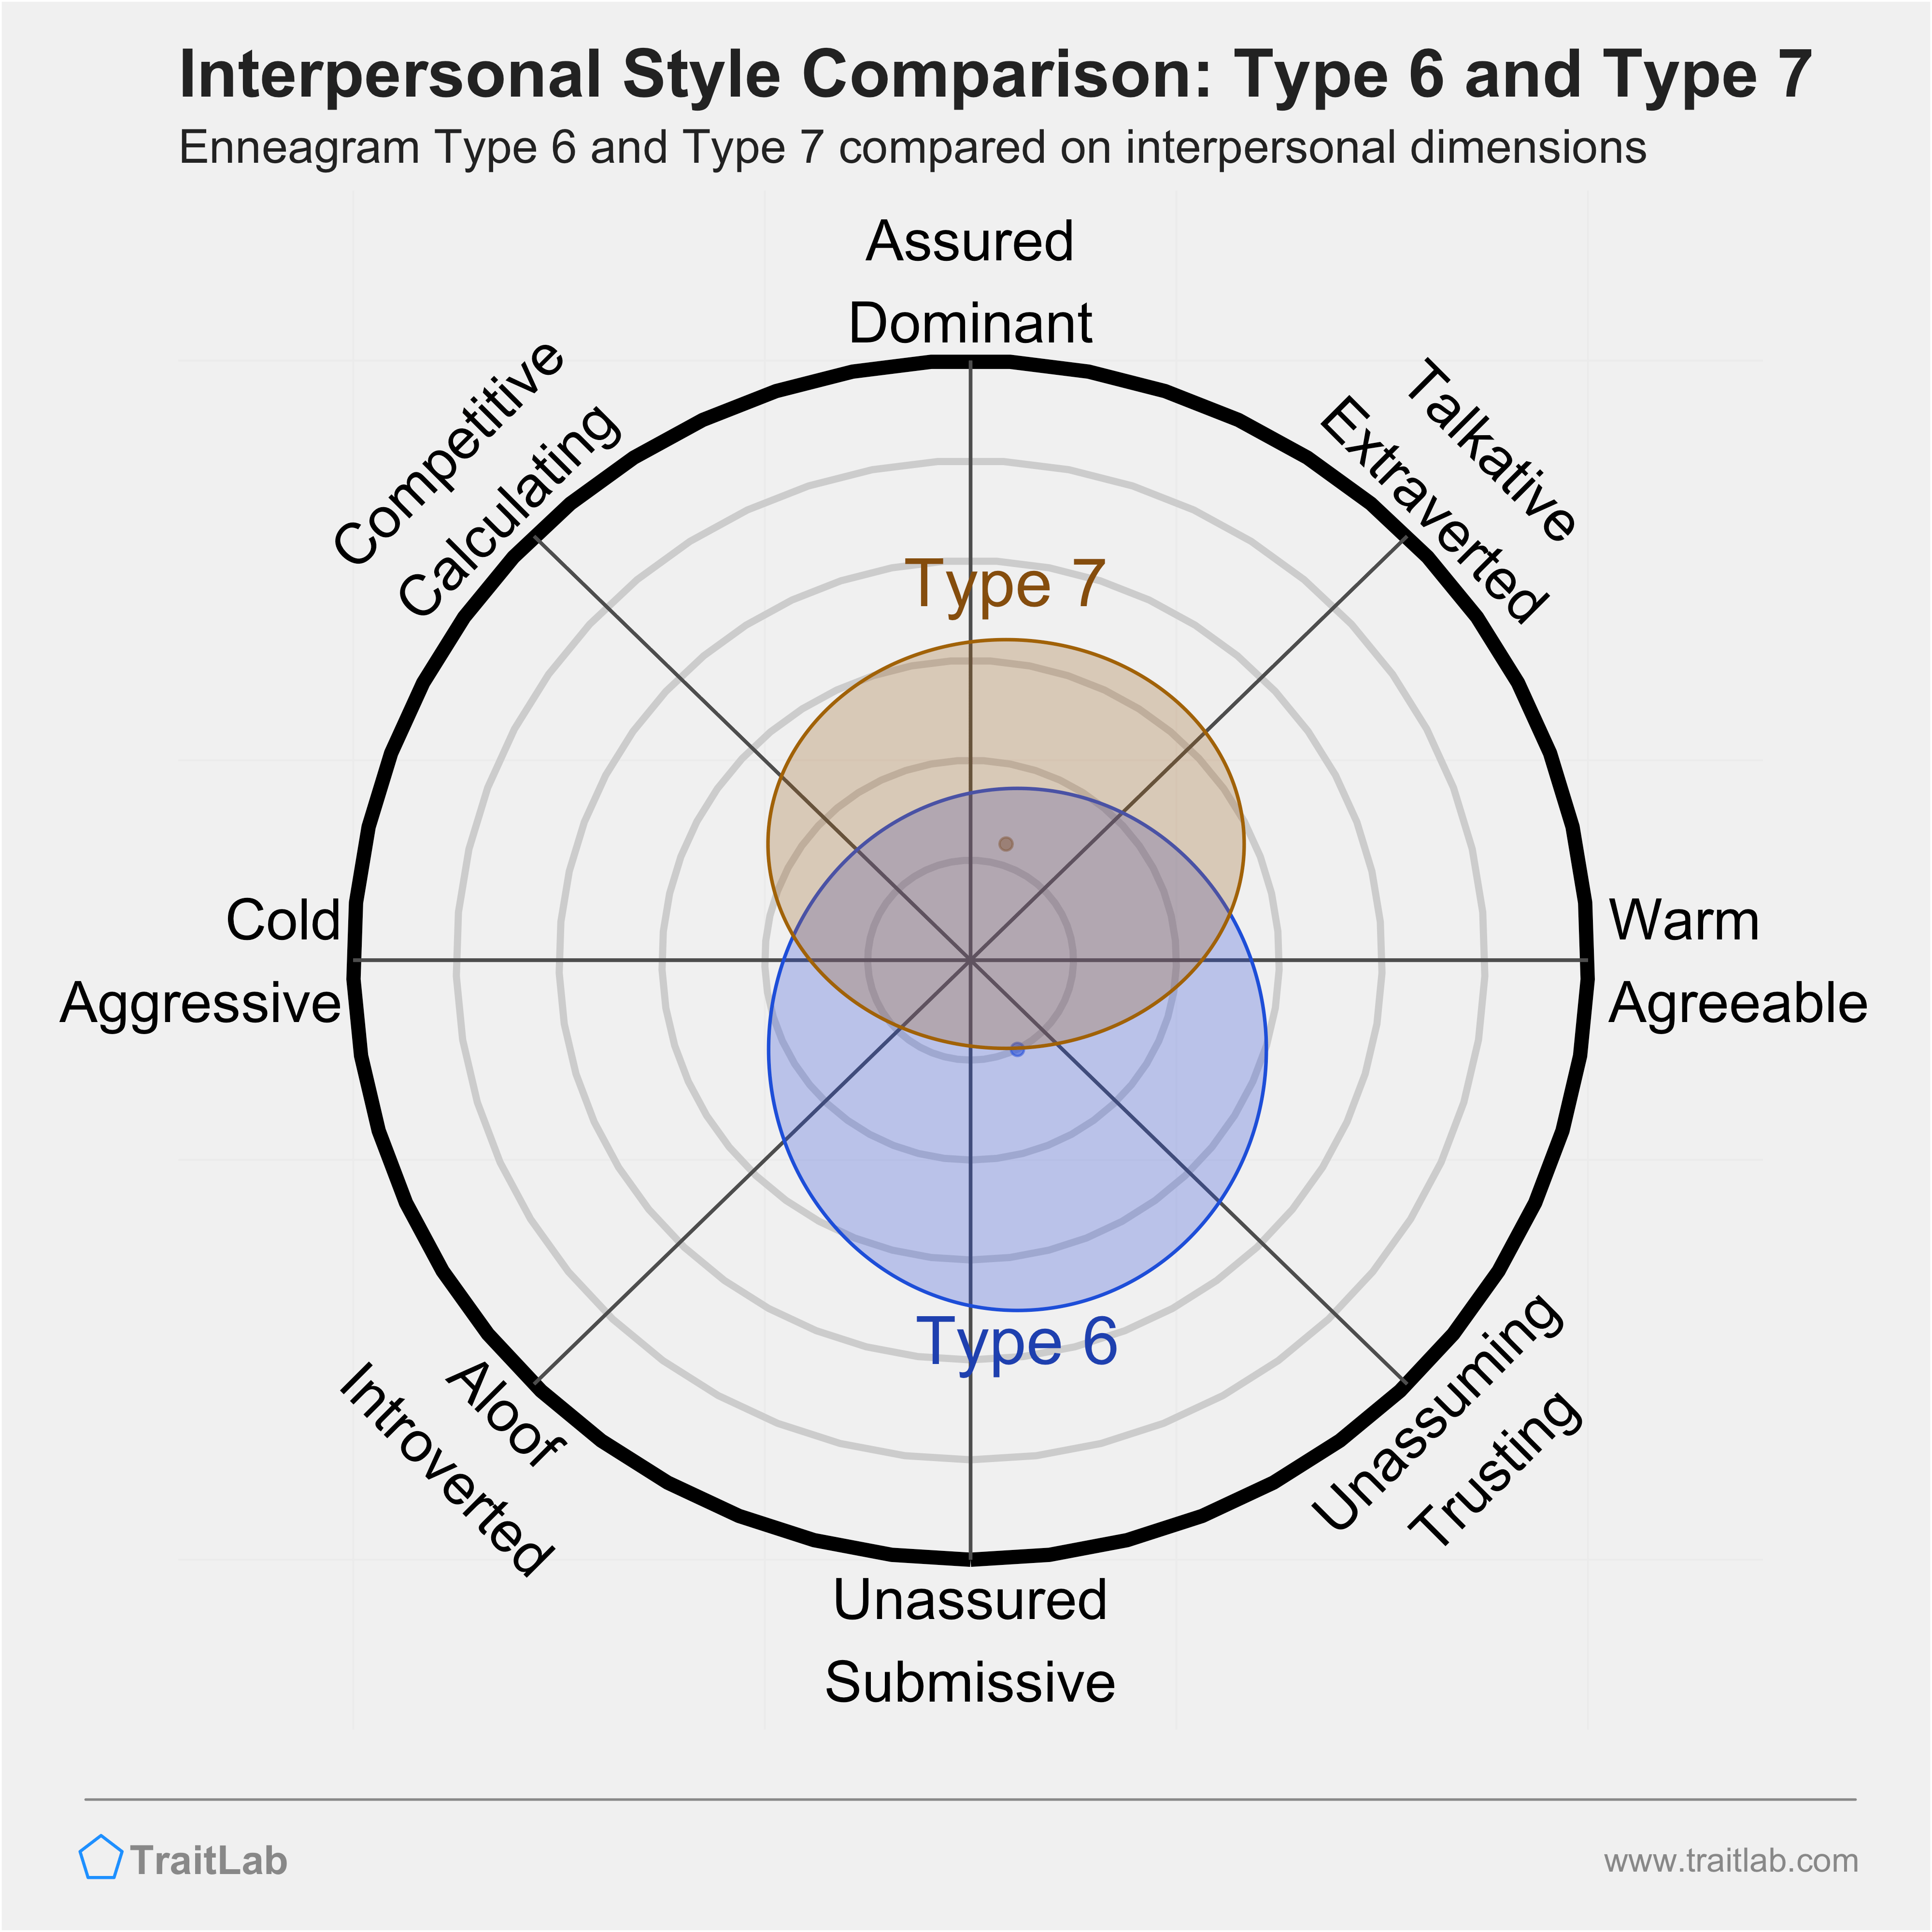 Enneagram Type 6 and Type 7 comparison across interpersonal dimensions